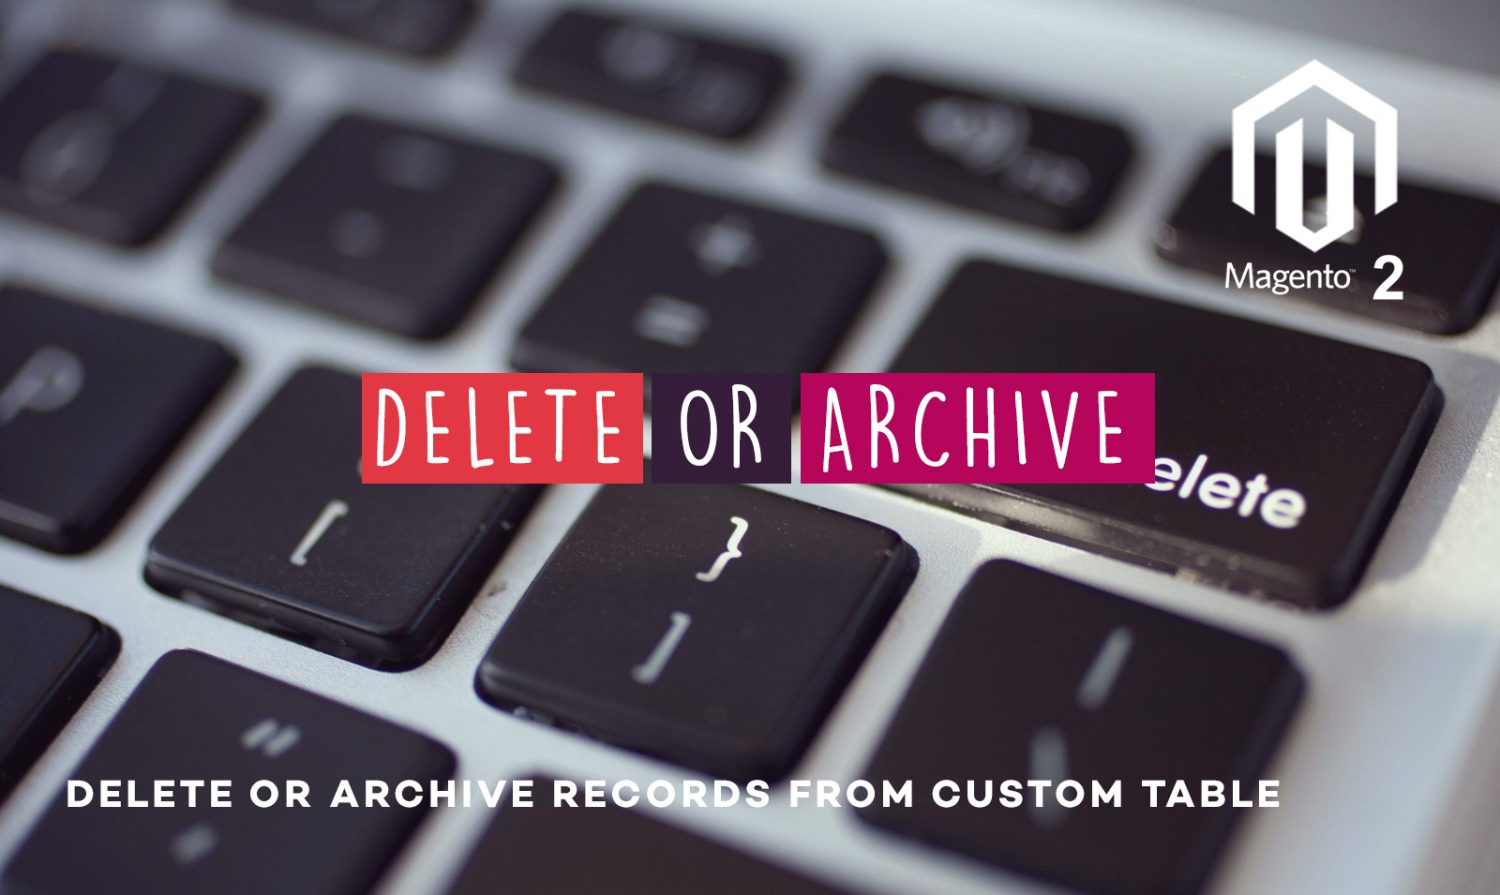 Magento 2 : How to delete or archive records from custom table?